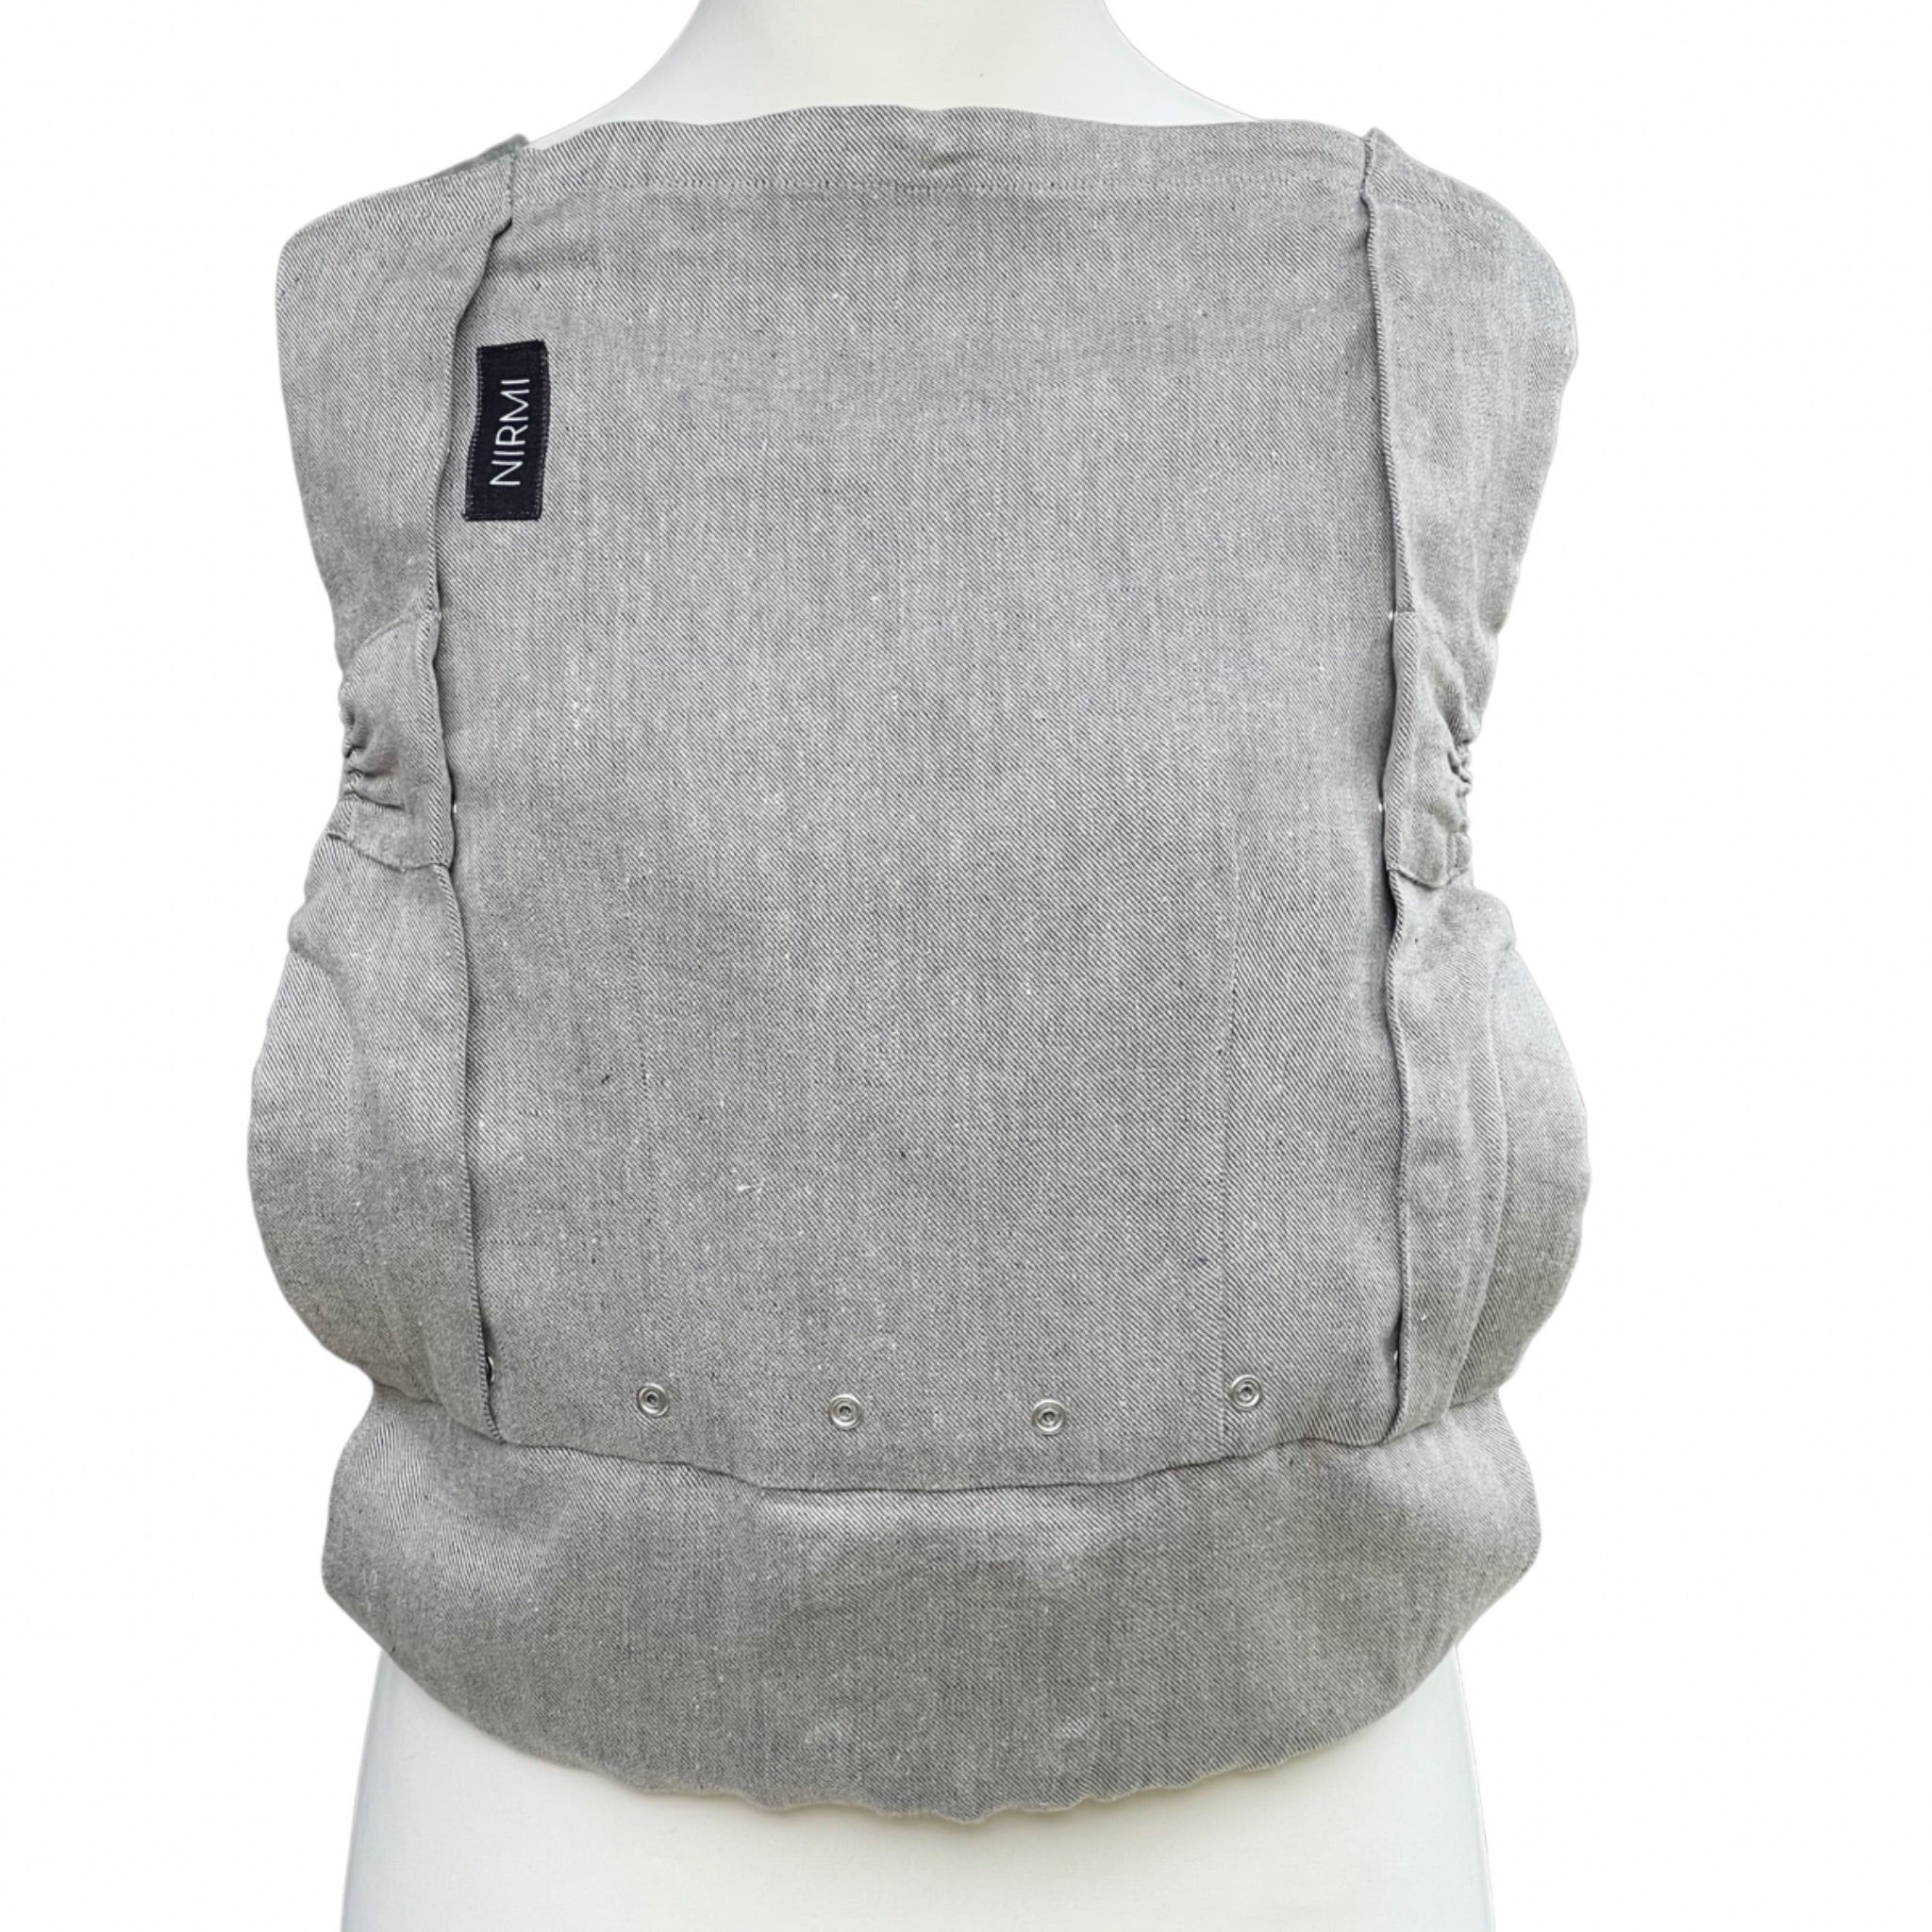 NIRMI Pure Baby Carrier | Sustainable and Ergonomic Slow Fashion Baby Carrier for Infants and Toddlers